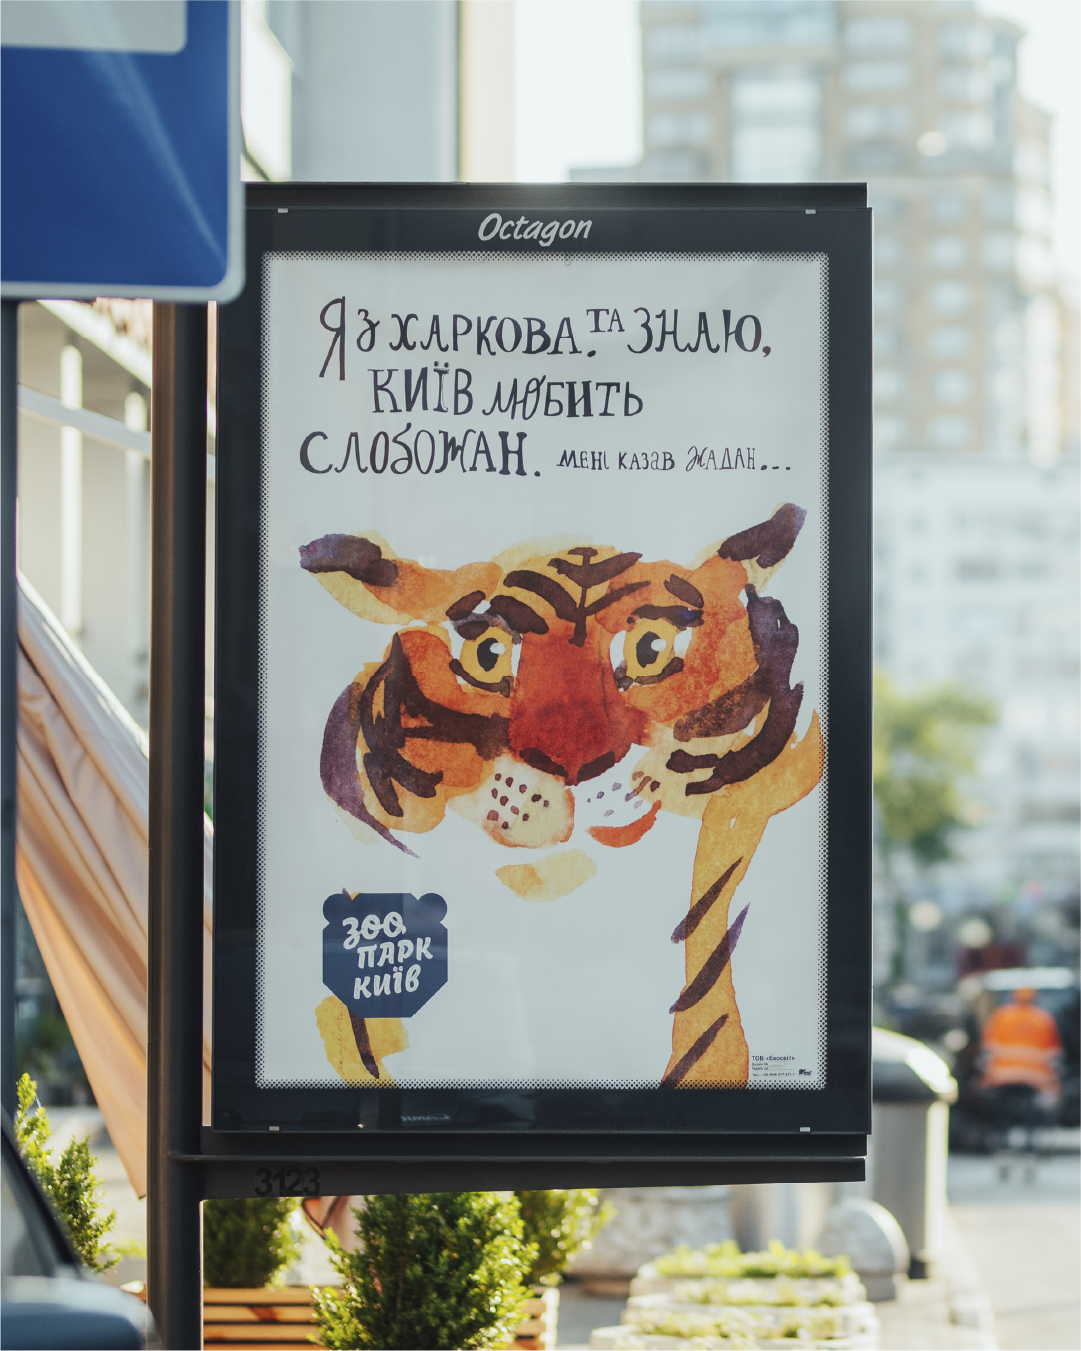 Campaign by Kyiv Zoo to support rescued animals